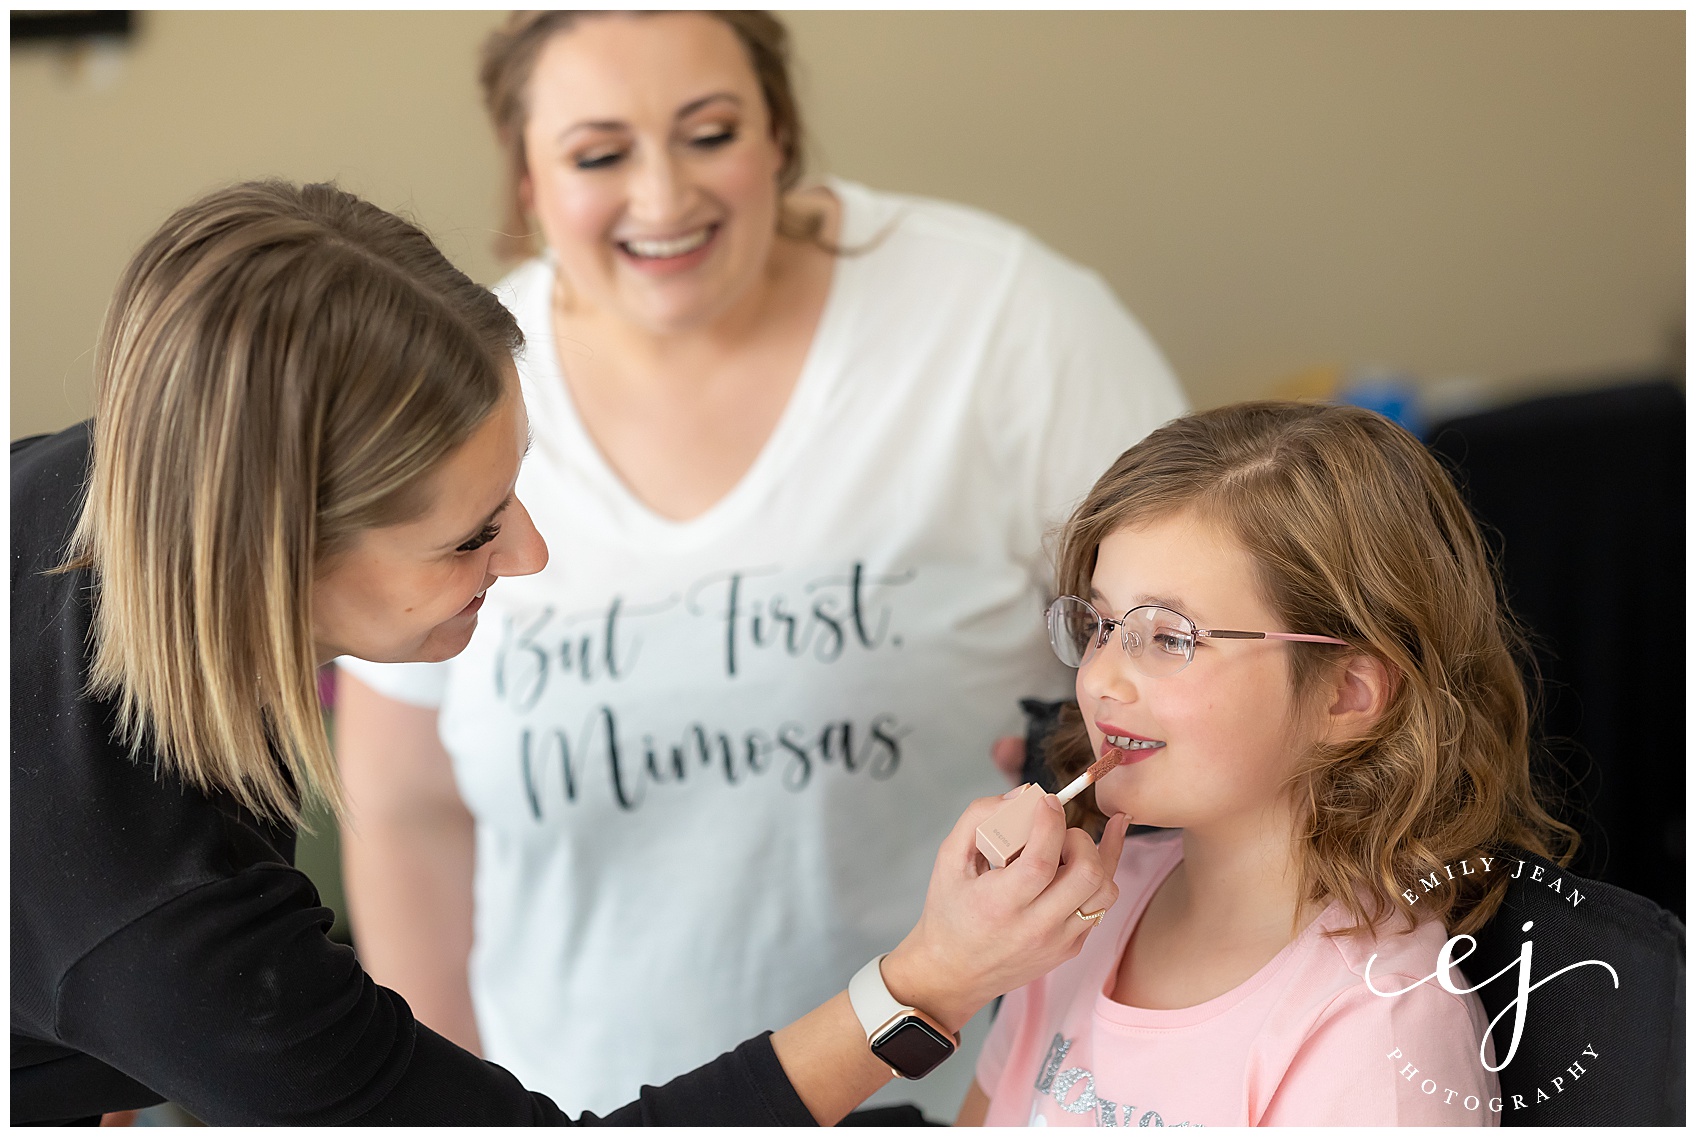 makeup by sarah koblitz putting makeup on flower girl with bride looking and smiling